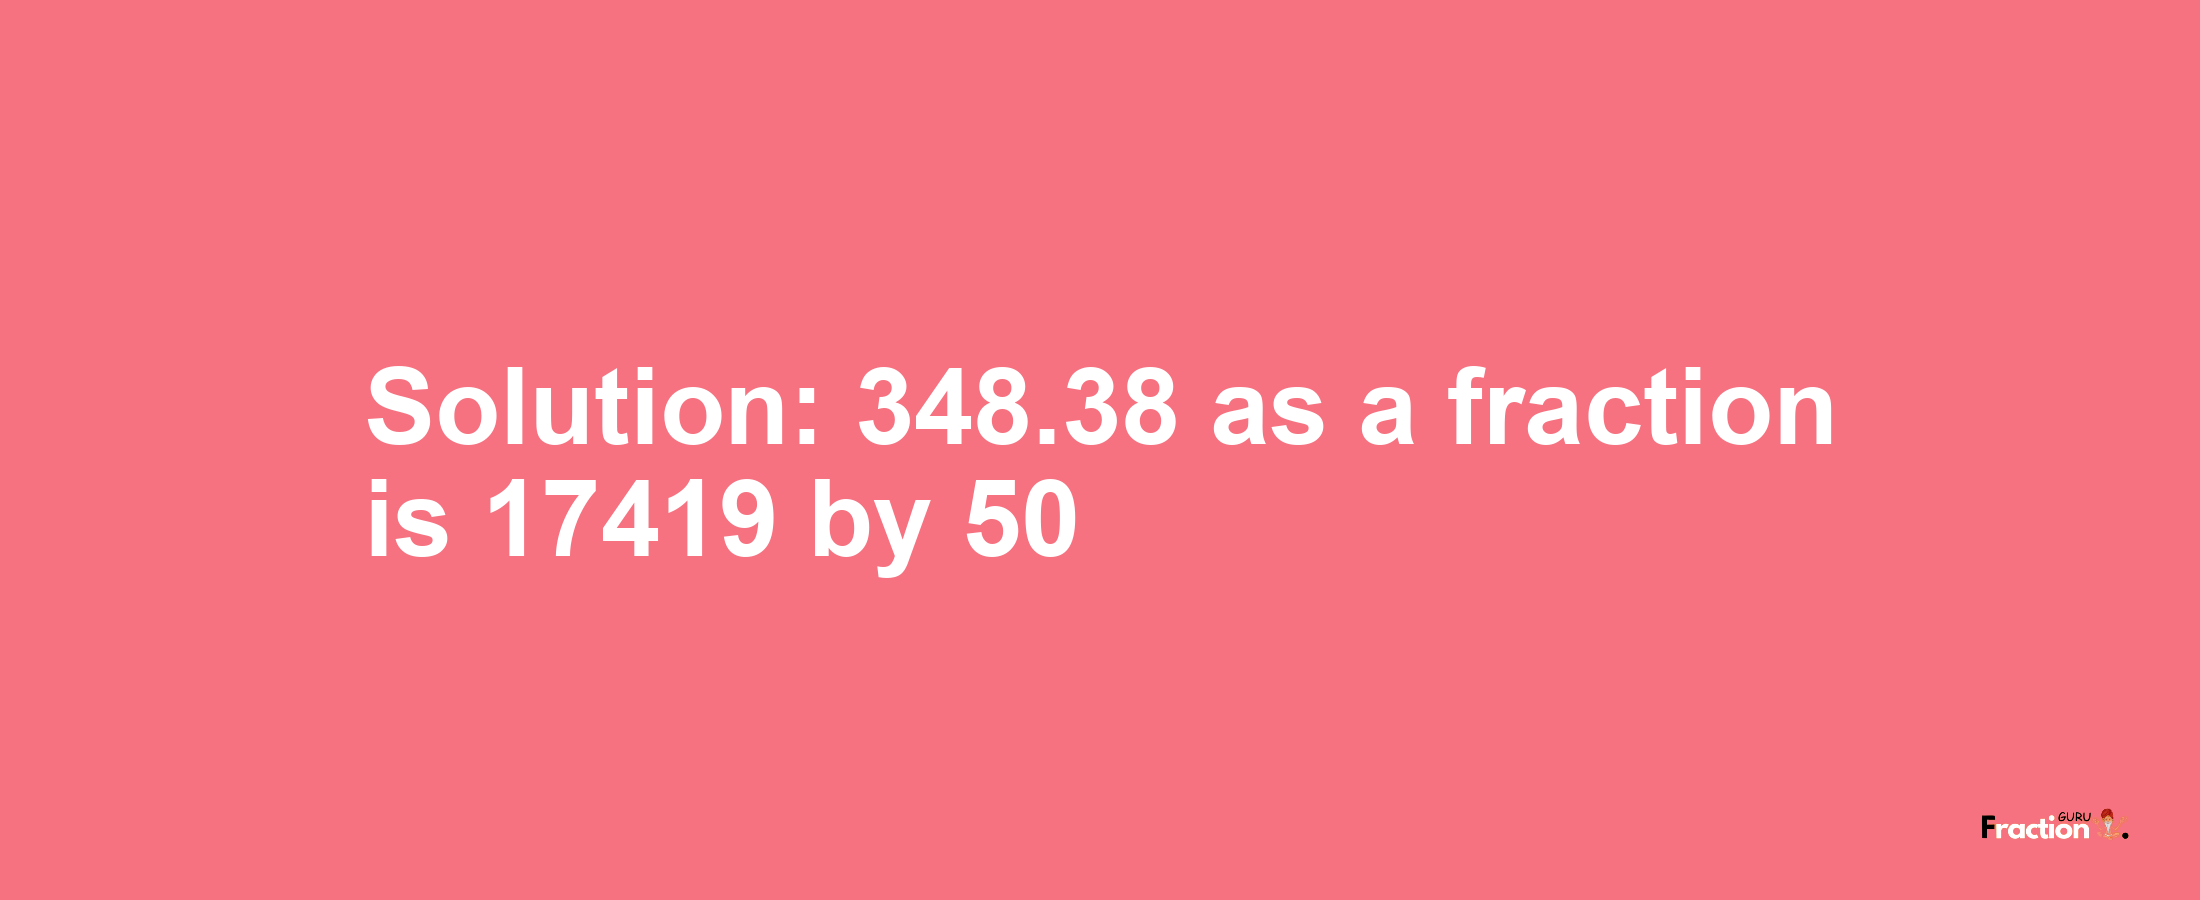 Solution:348.38 as a fraction is 17419/50